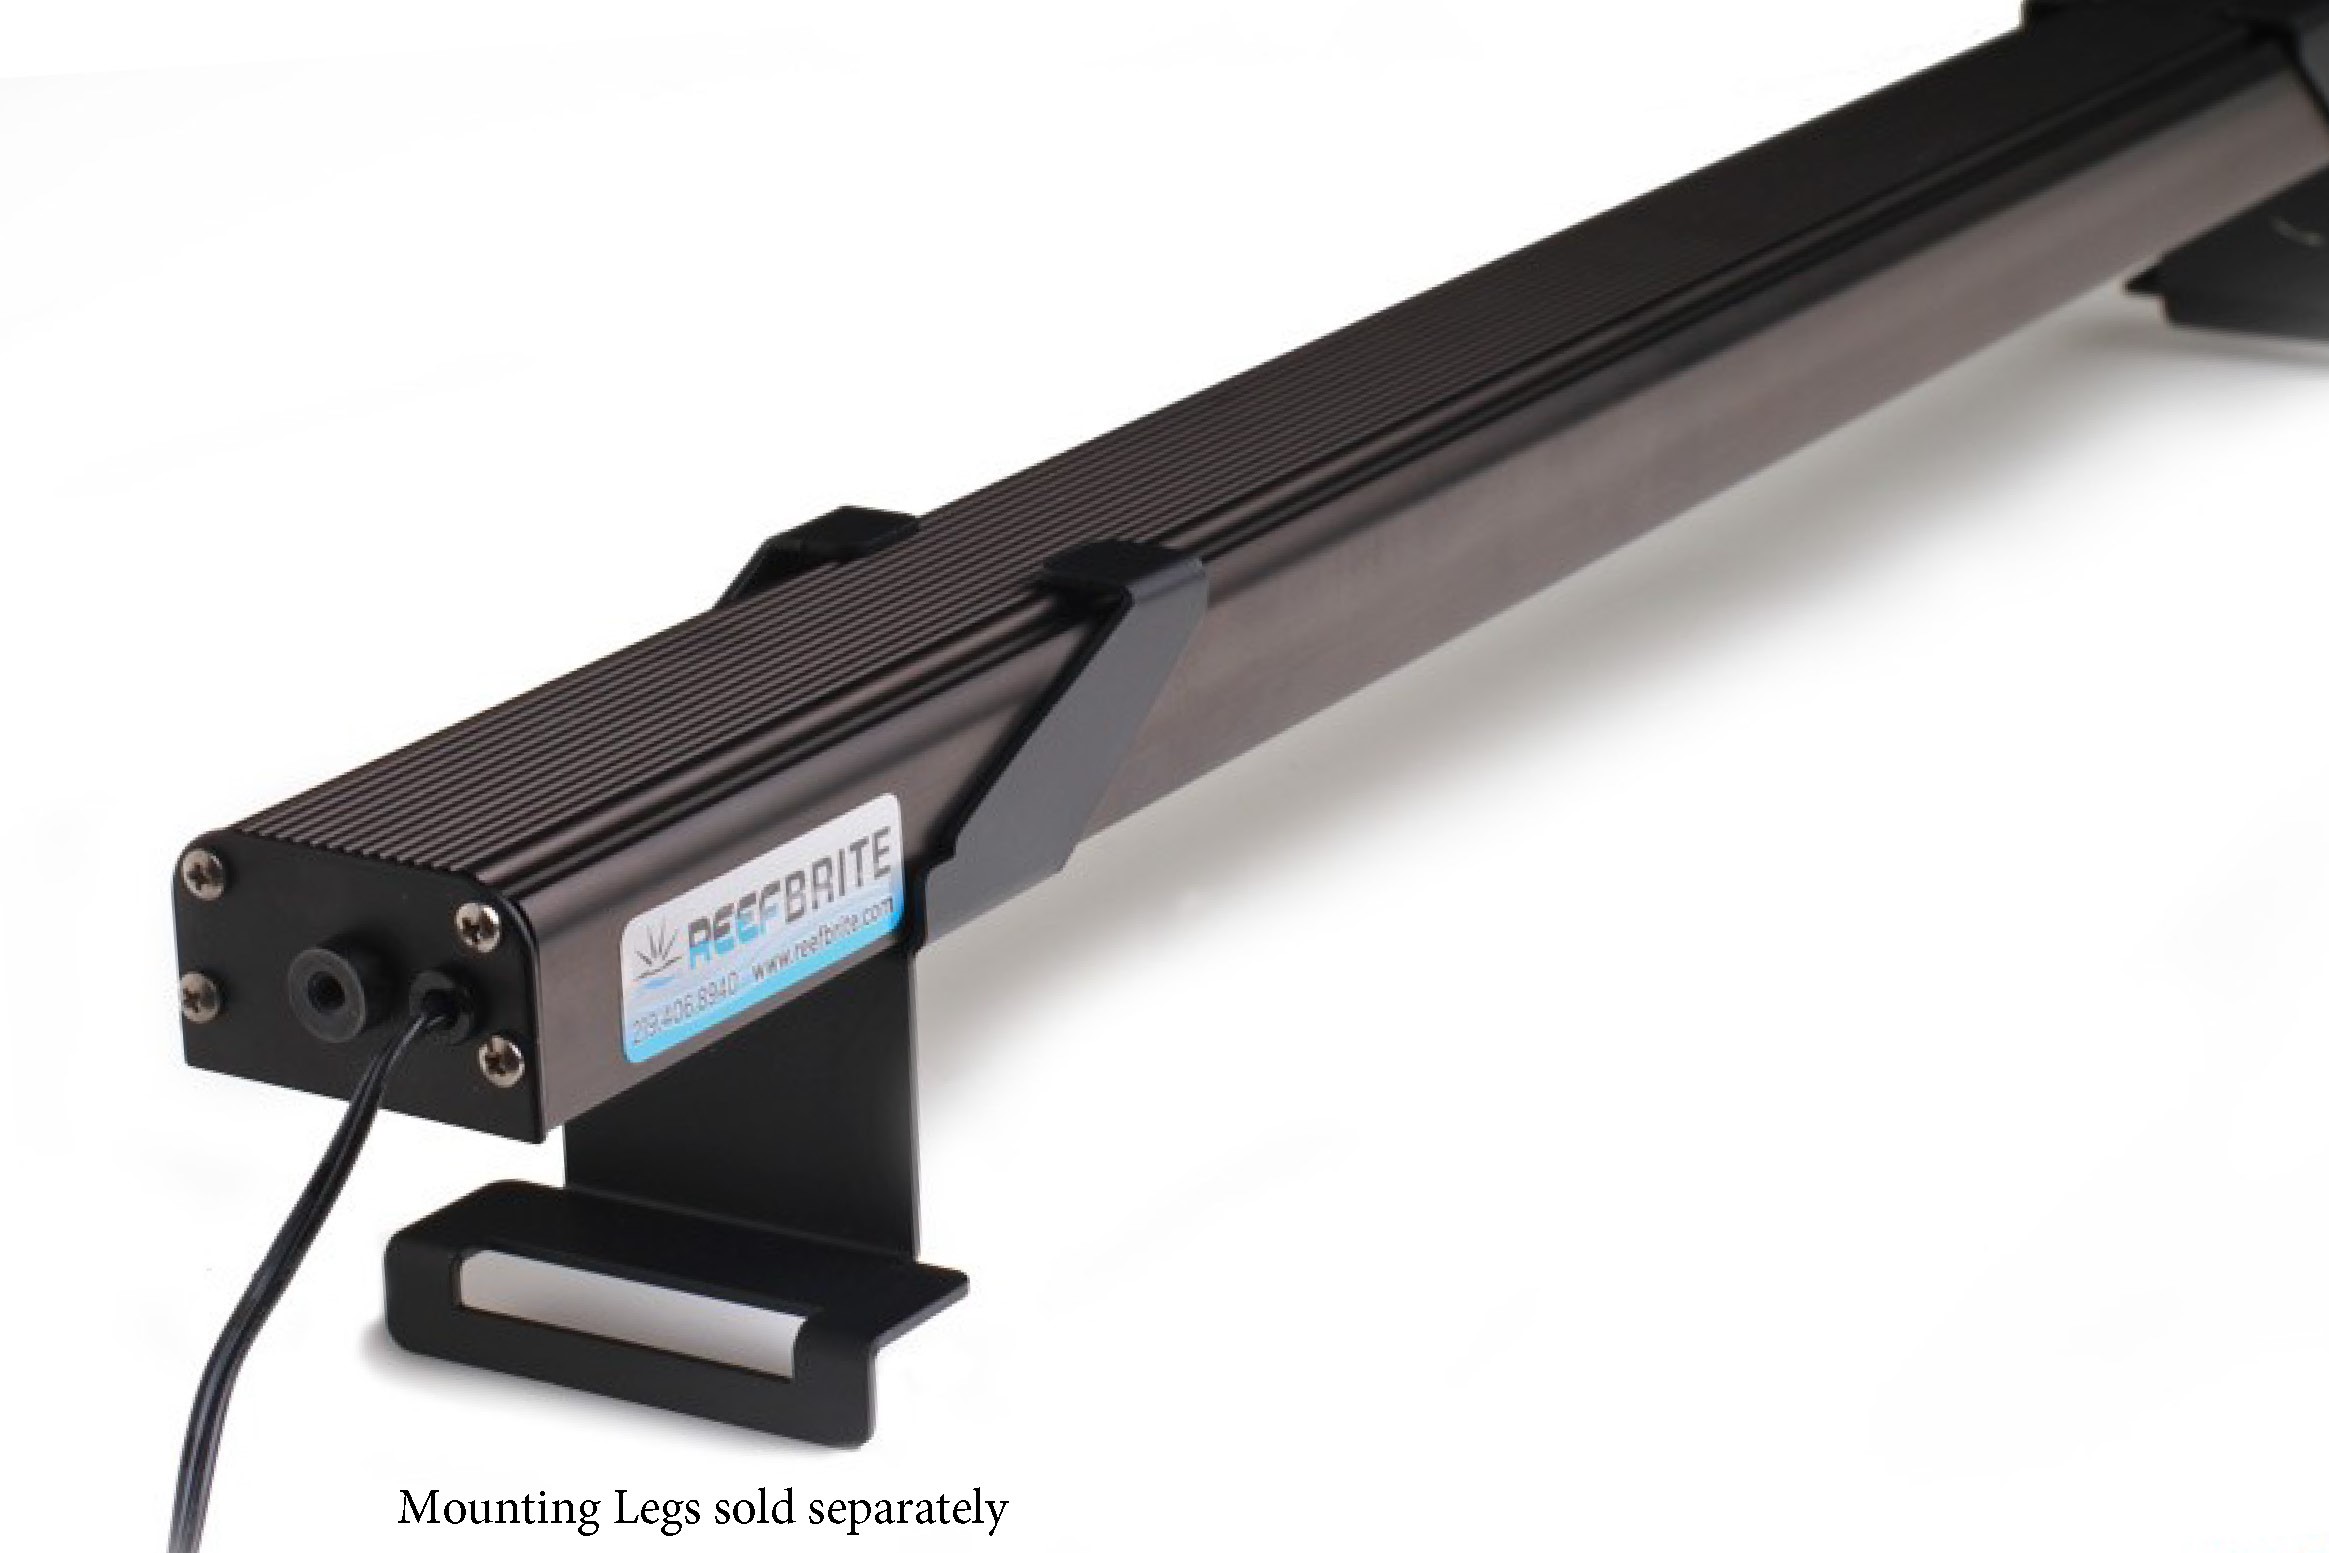 XHO-High-Power-LED-Bar-with-Mountings-Legs-sold-seperately.pdf.jpg